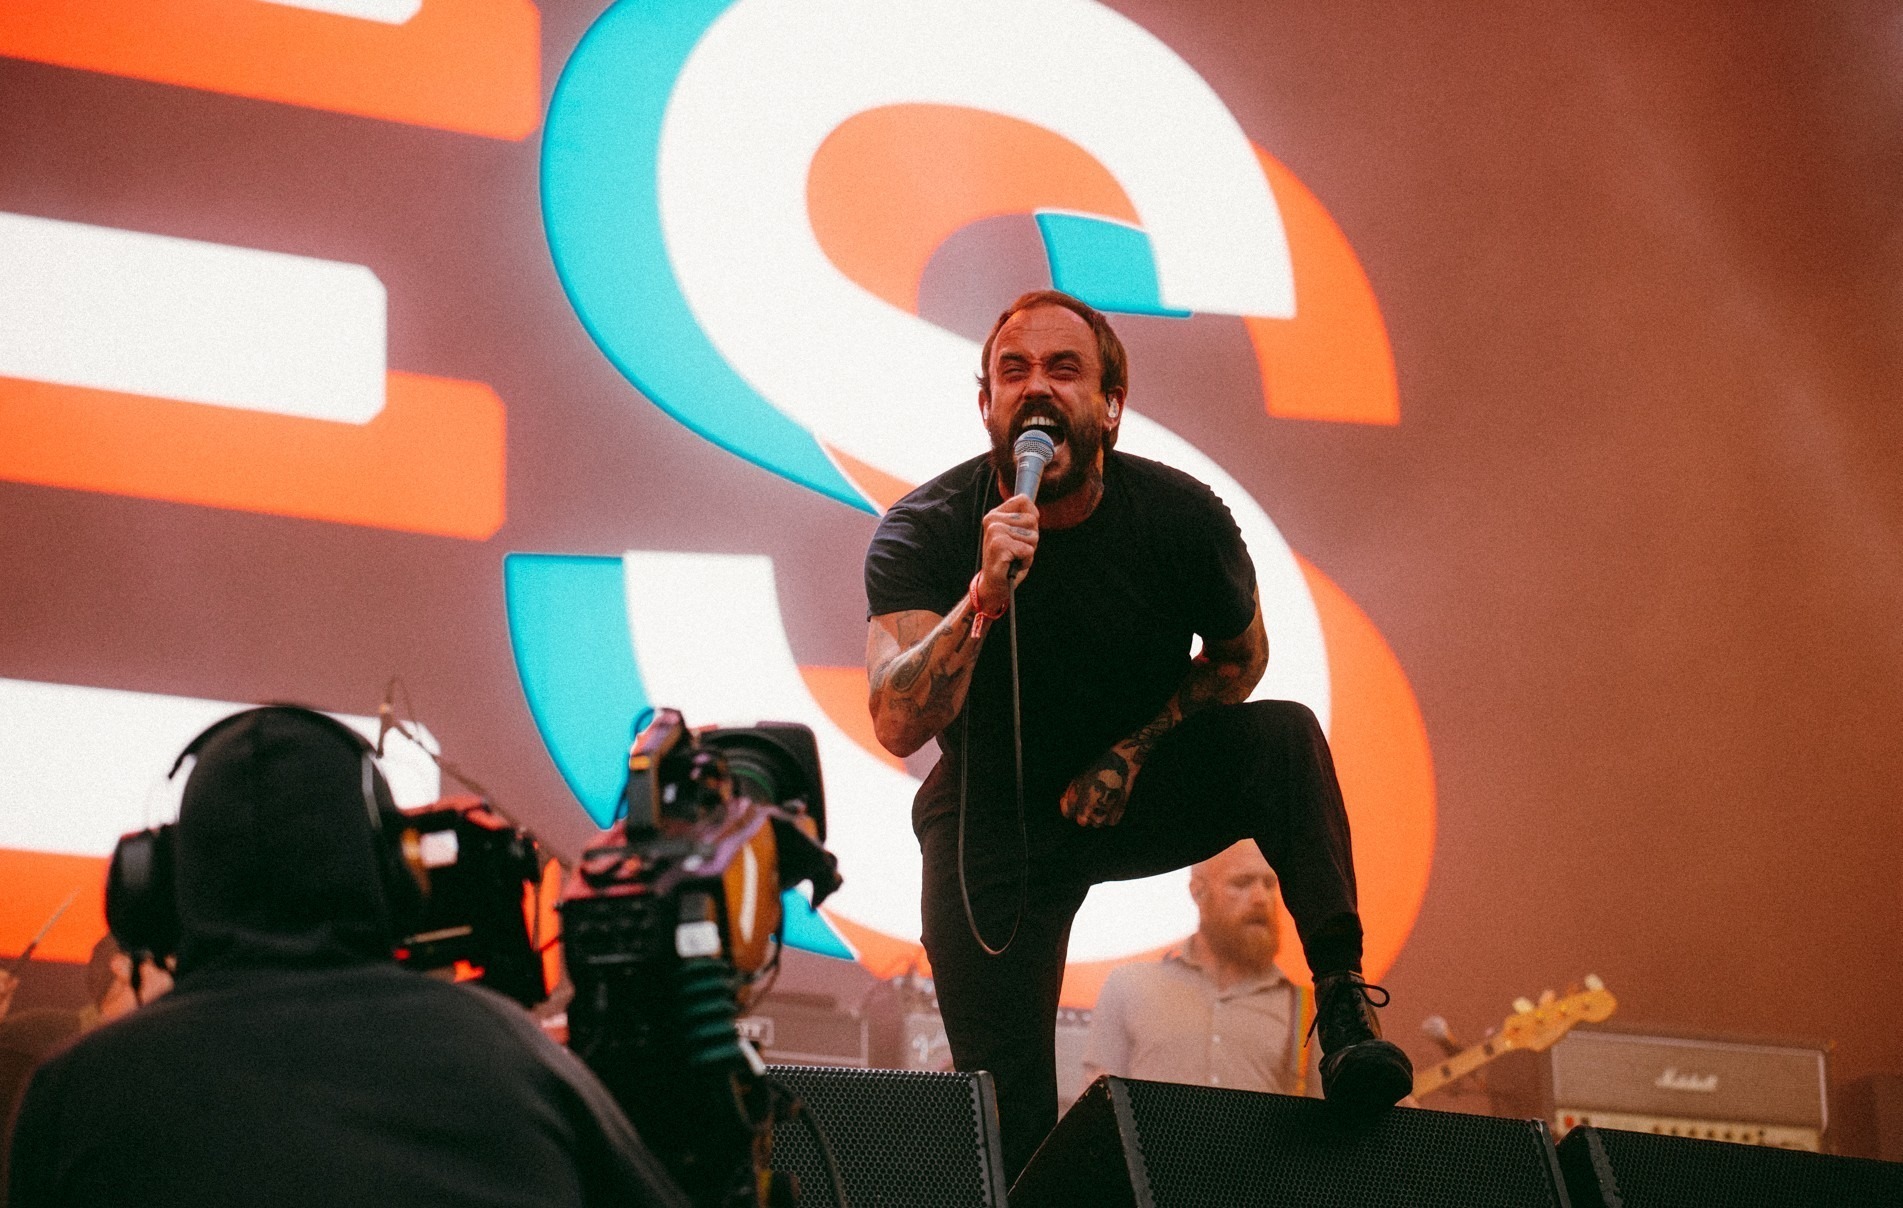 IDLES at Glastonbury 2022: “We want to headline the Pyramid Stage, but when we’re worthy”